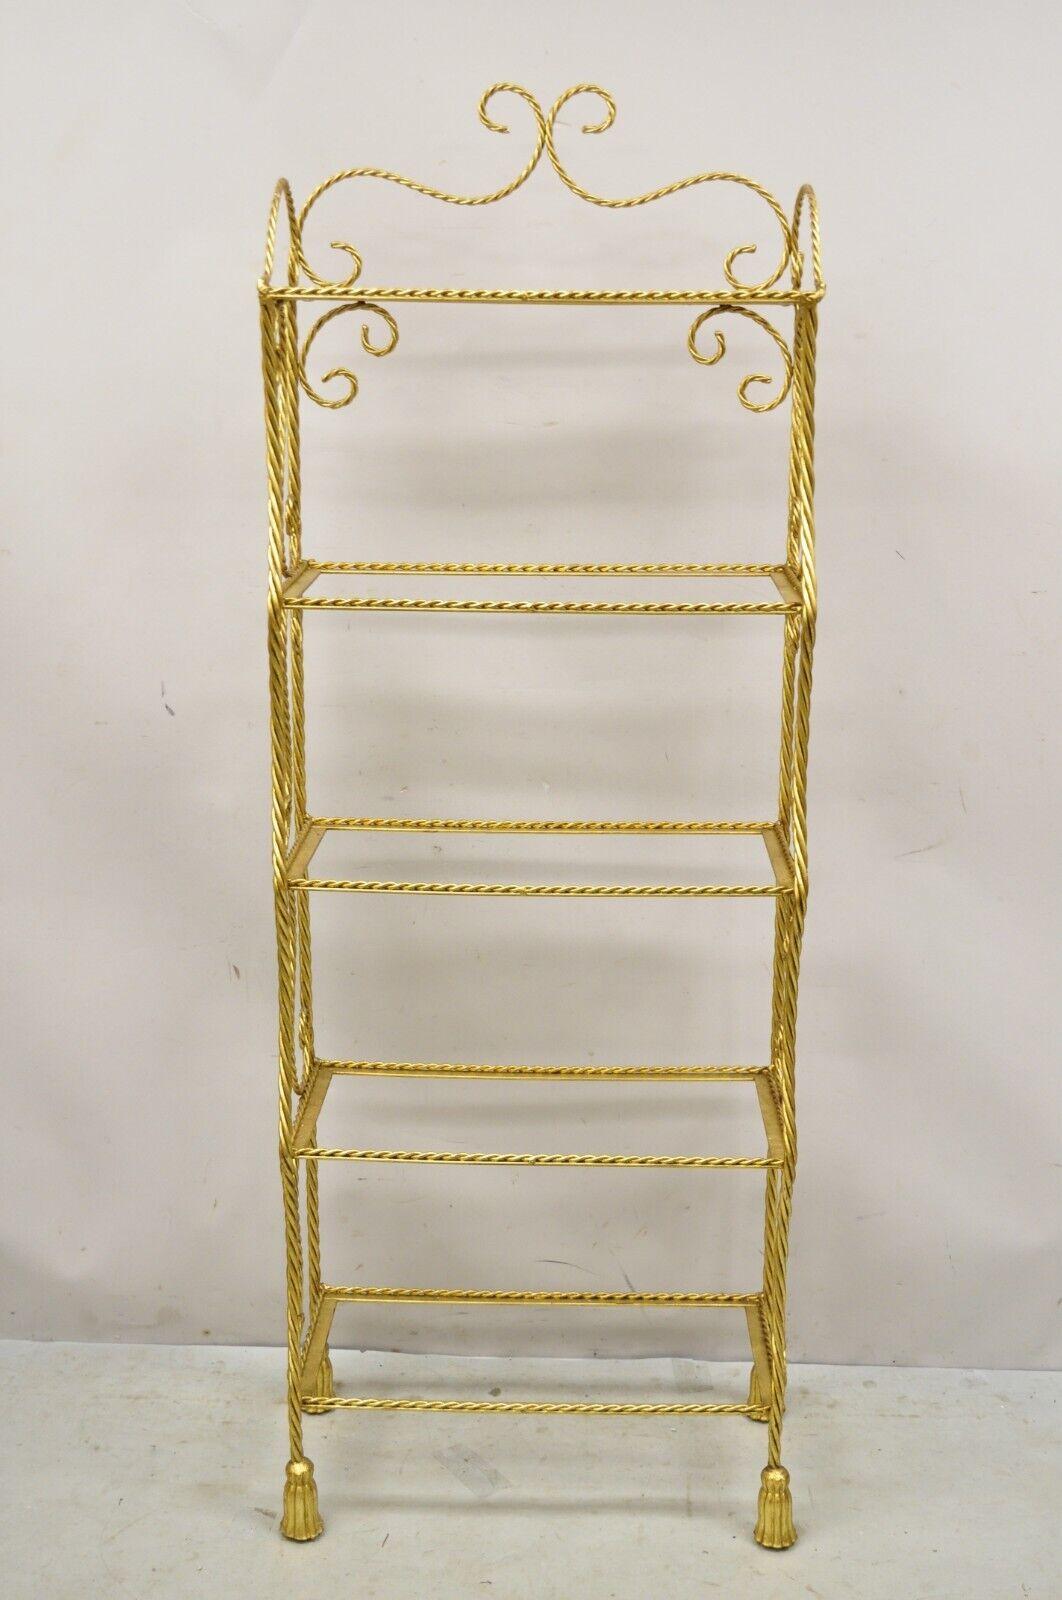 Italian Hollywood Regency Gold Gilt Iron 5 Tier Rope Tassel Narrow Etagere Stand. Item features gold gilt iron frame, rope design with tassel feet, 5 tiers (no glass shelves), wrought iron construction, very nice vintage item, quality Italian